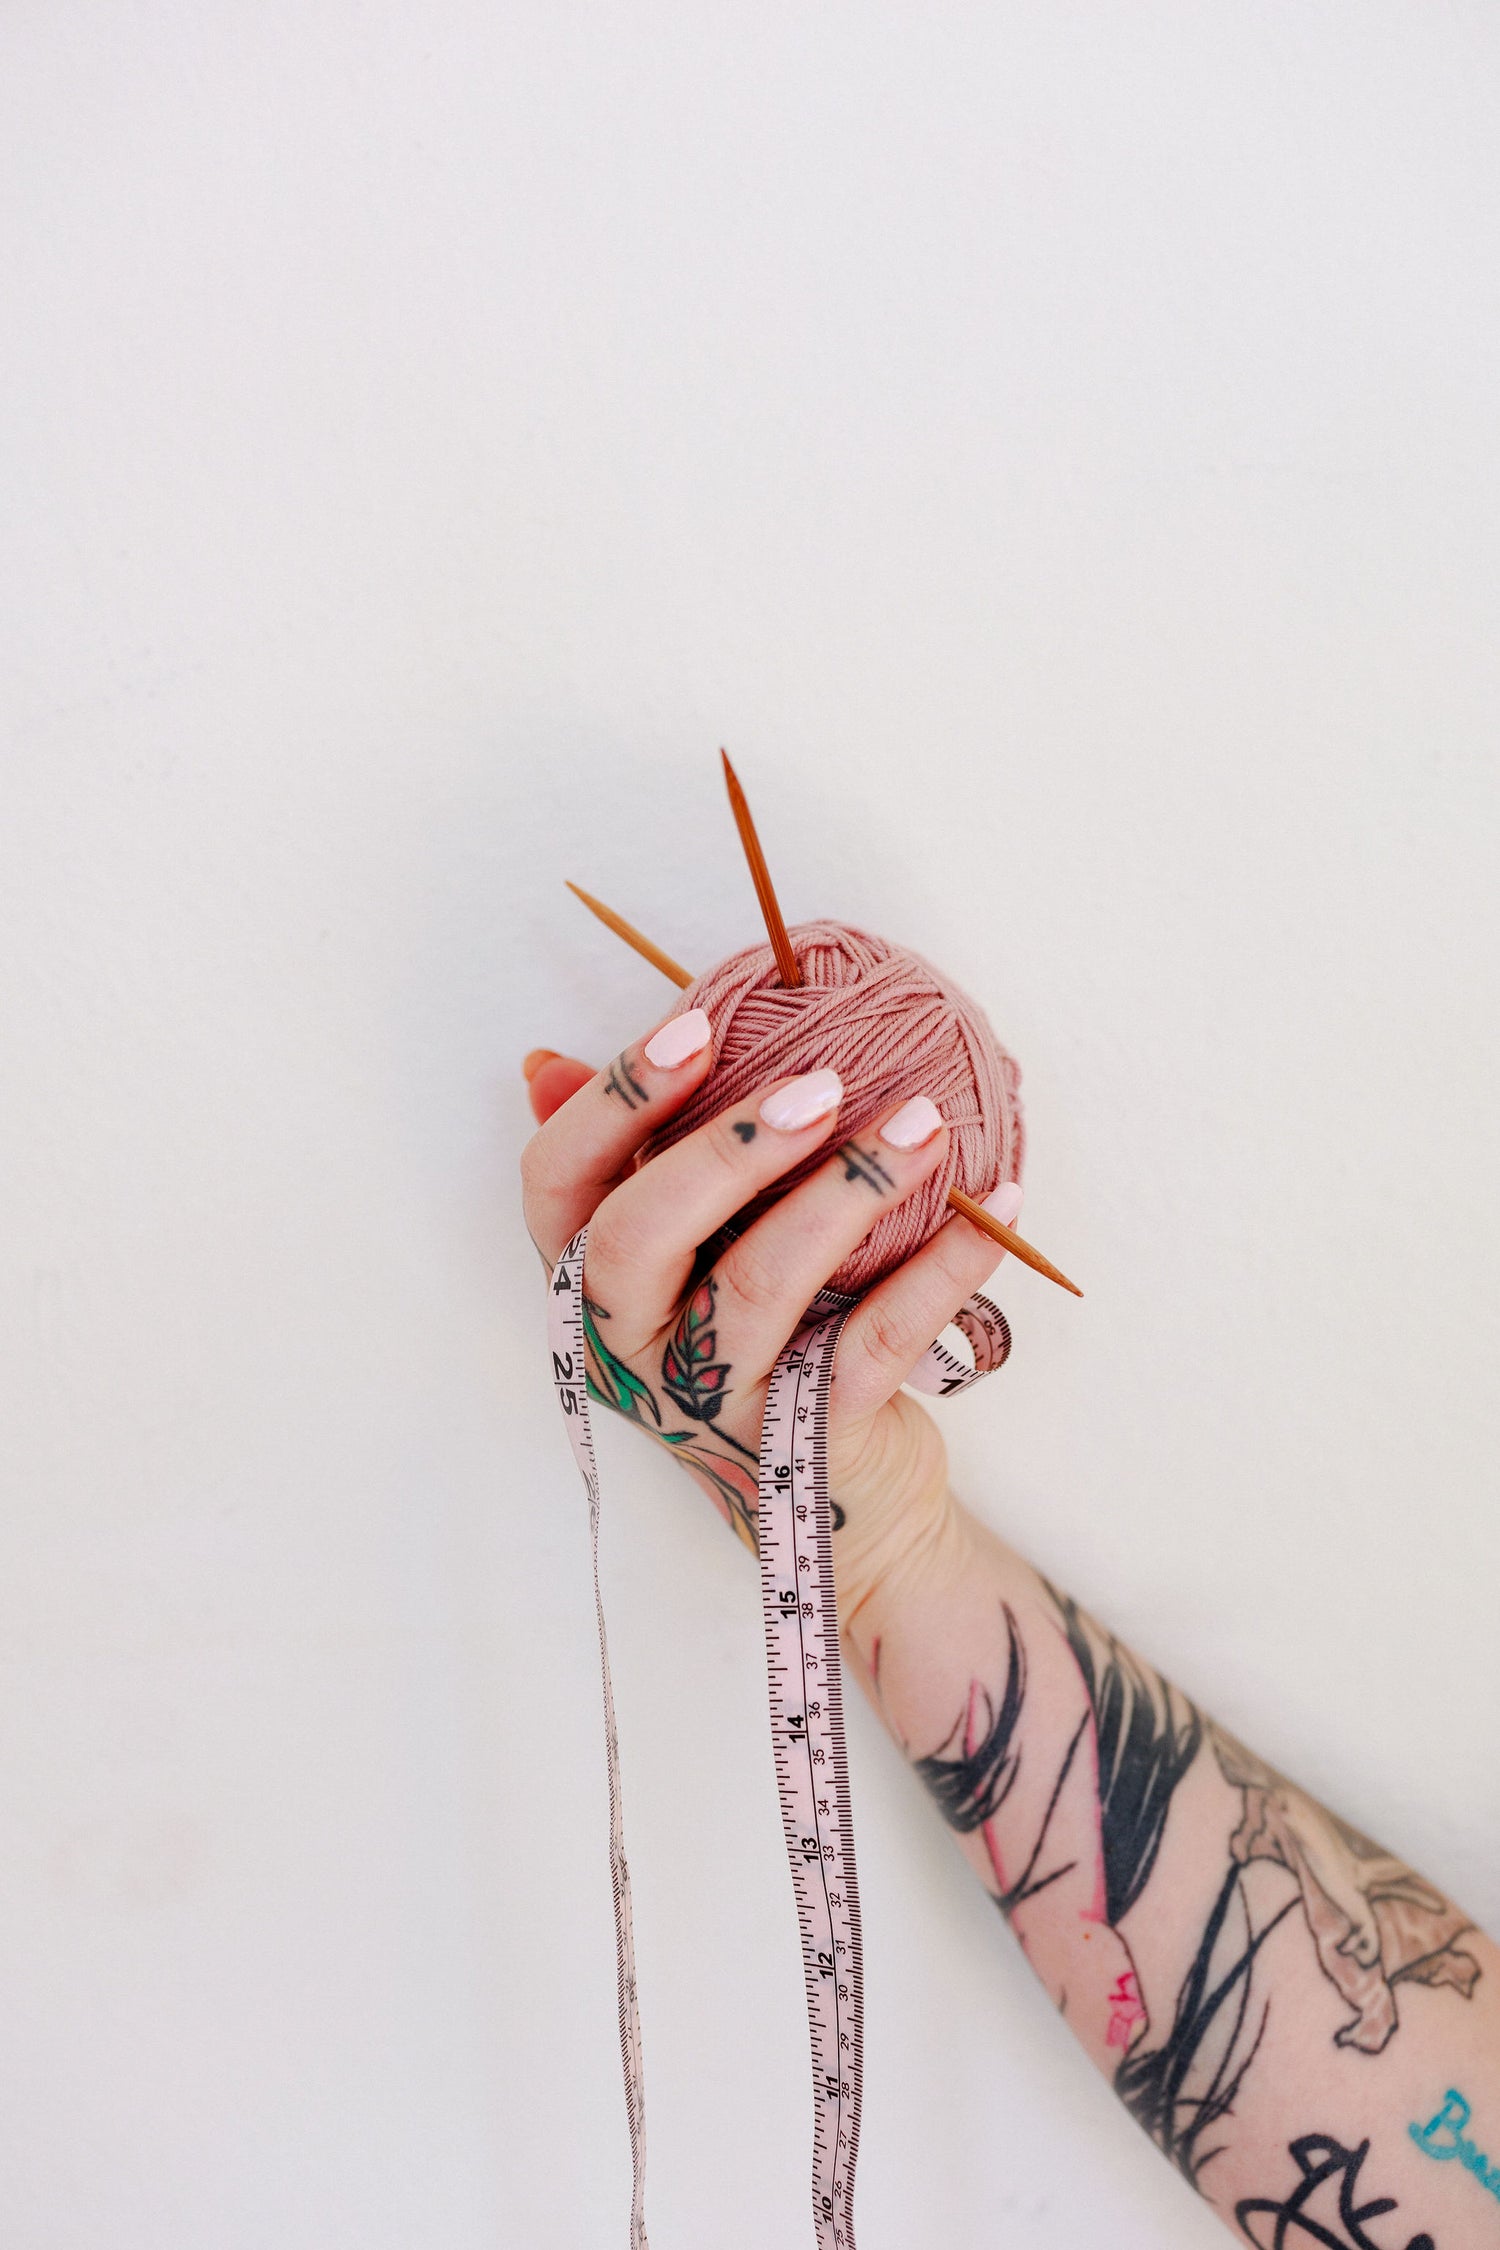 A woman's arm with tattoos holds a ball of pink yarn with knitting needles. A dressmaker's tape measure is spooled in her hand and drapes towards the bottom of the frame.